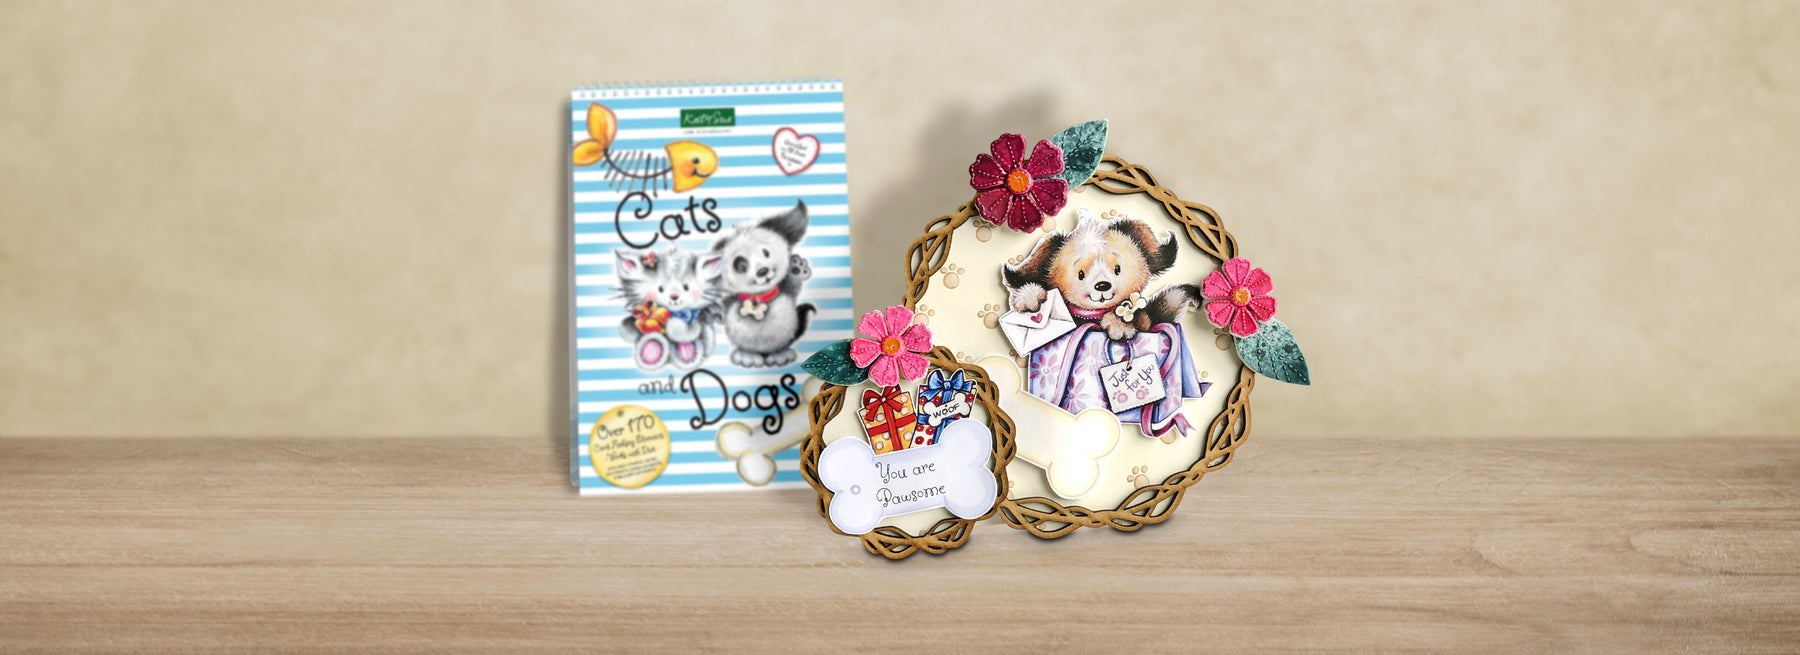 Cats & Dogs Frame Tutorial